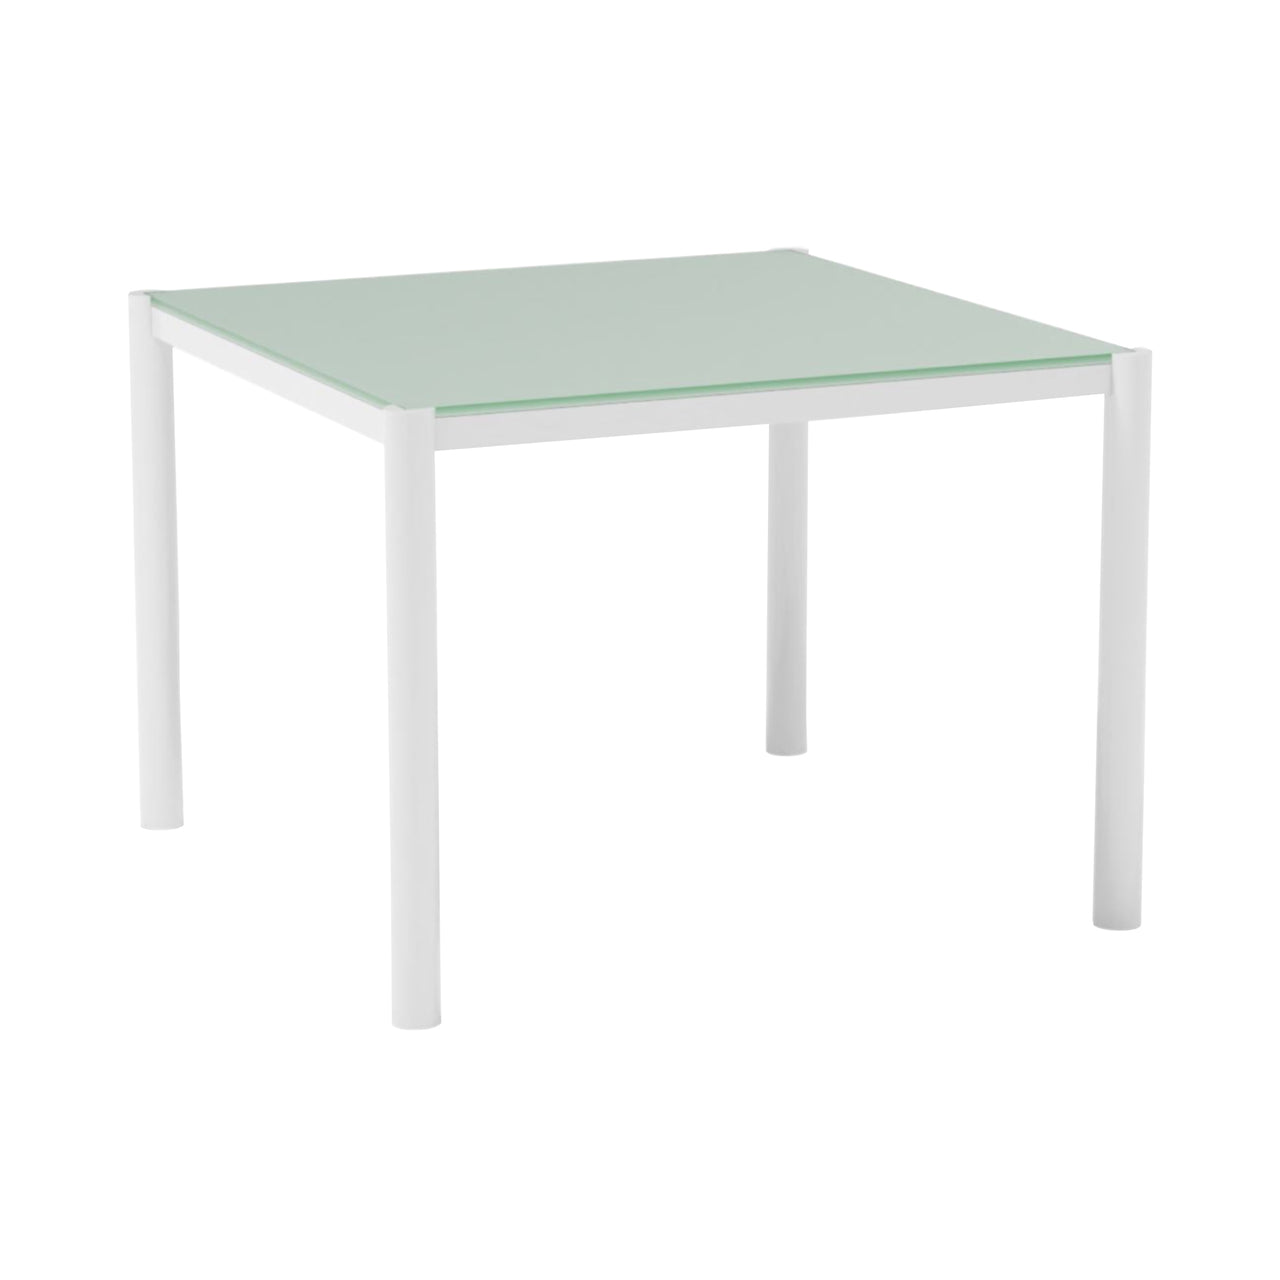 Get-Together Dining Table: Square + White + Clear Glass